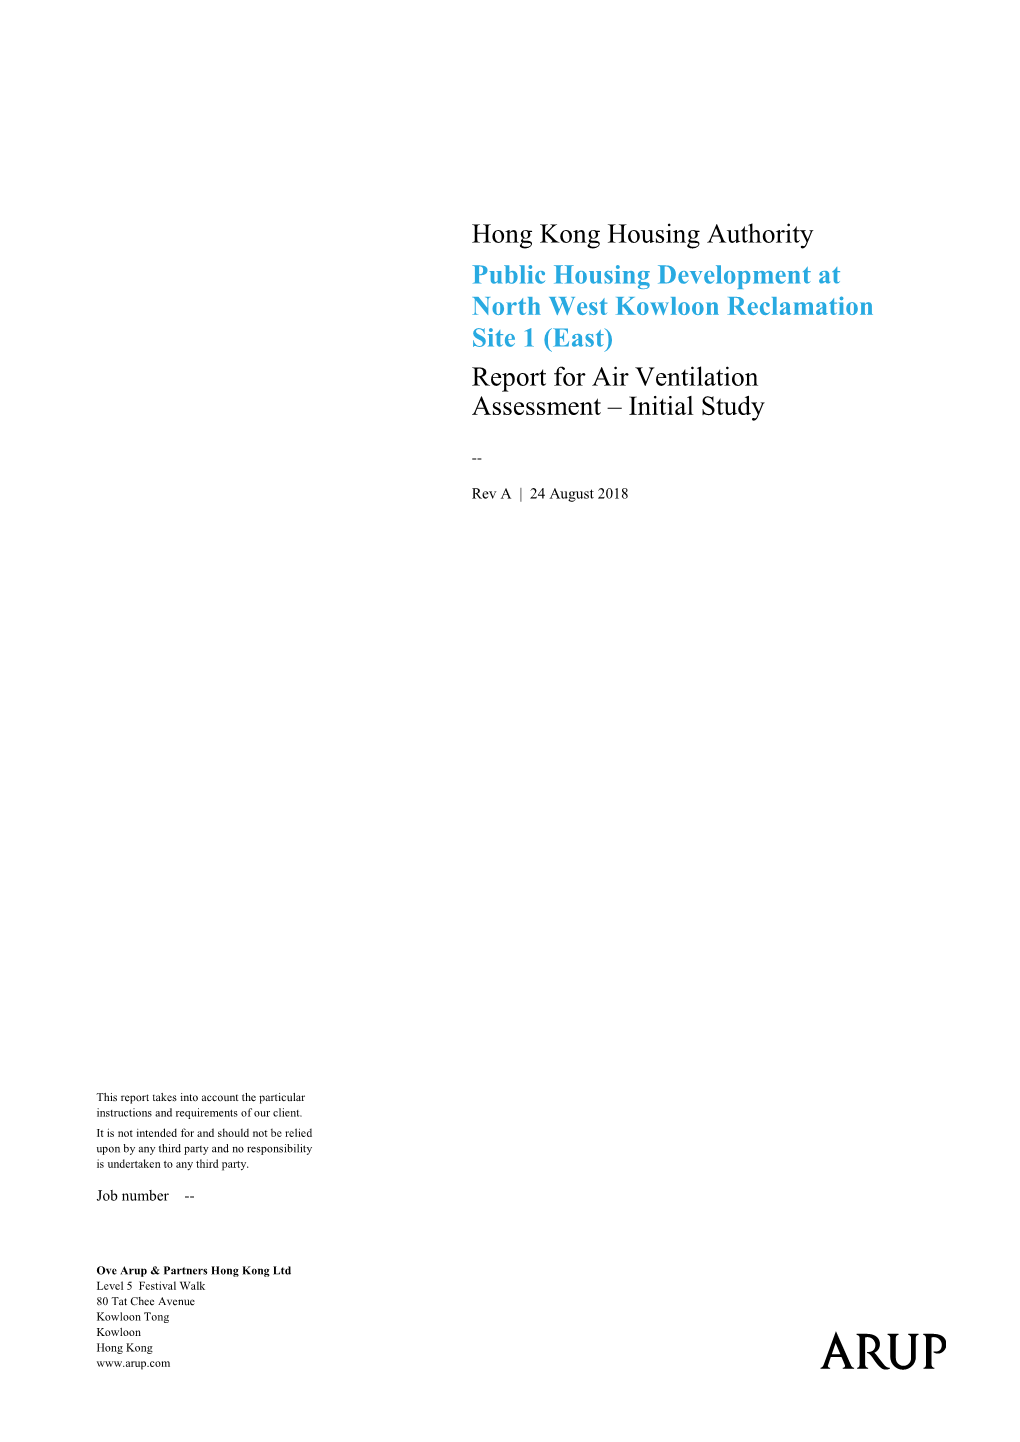 Hong Kong Housing Authority Public Housing Development at North West Kowloon Reclamation Site 1 (East) Report for Air Ventilation Assessment – Initial Study